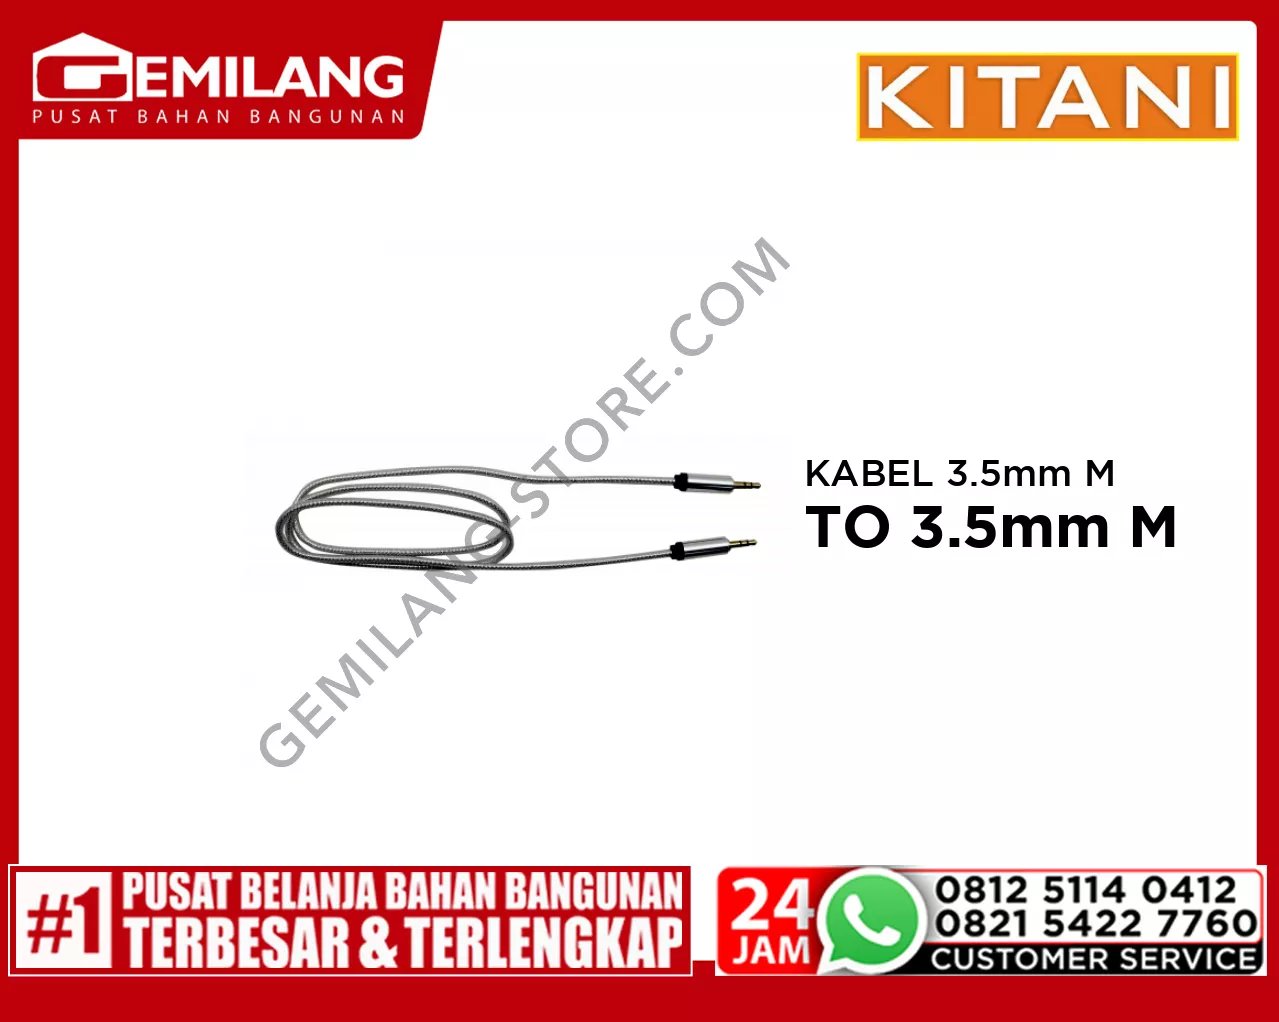 KITANI KABEL 3.5mm MALE STEREO TO 3.5mm MALE STRREO GOLD KECIL